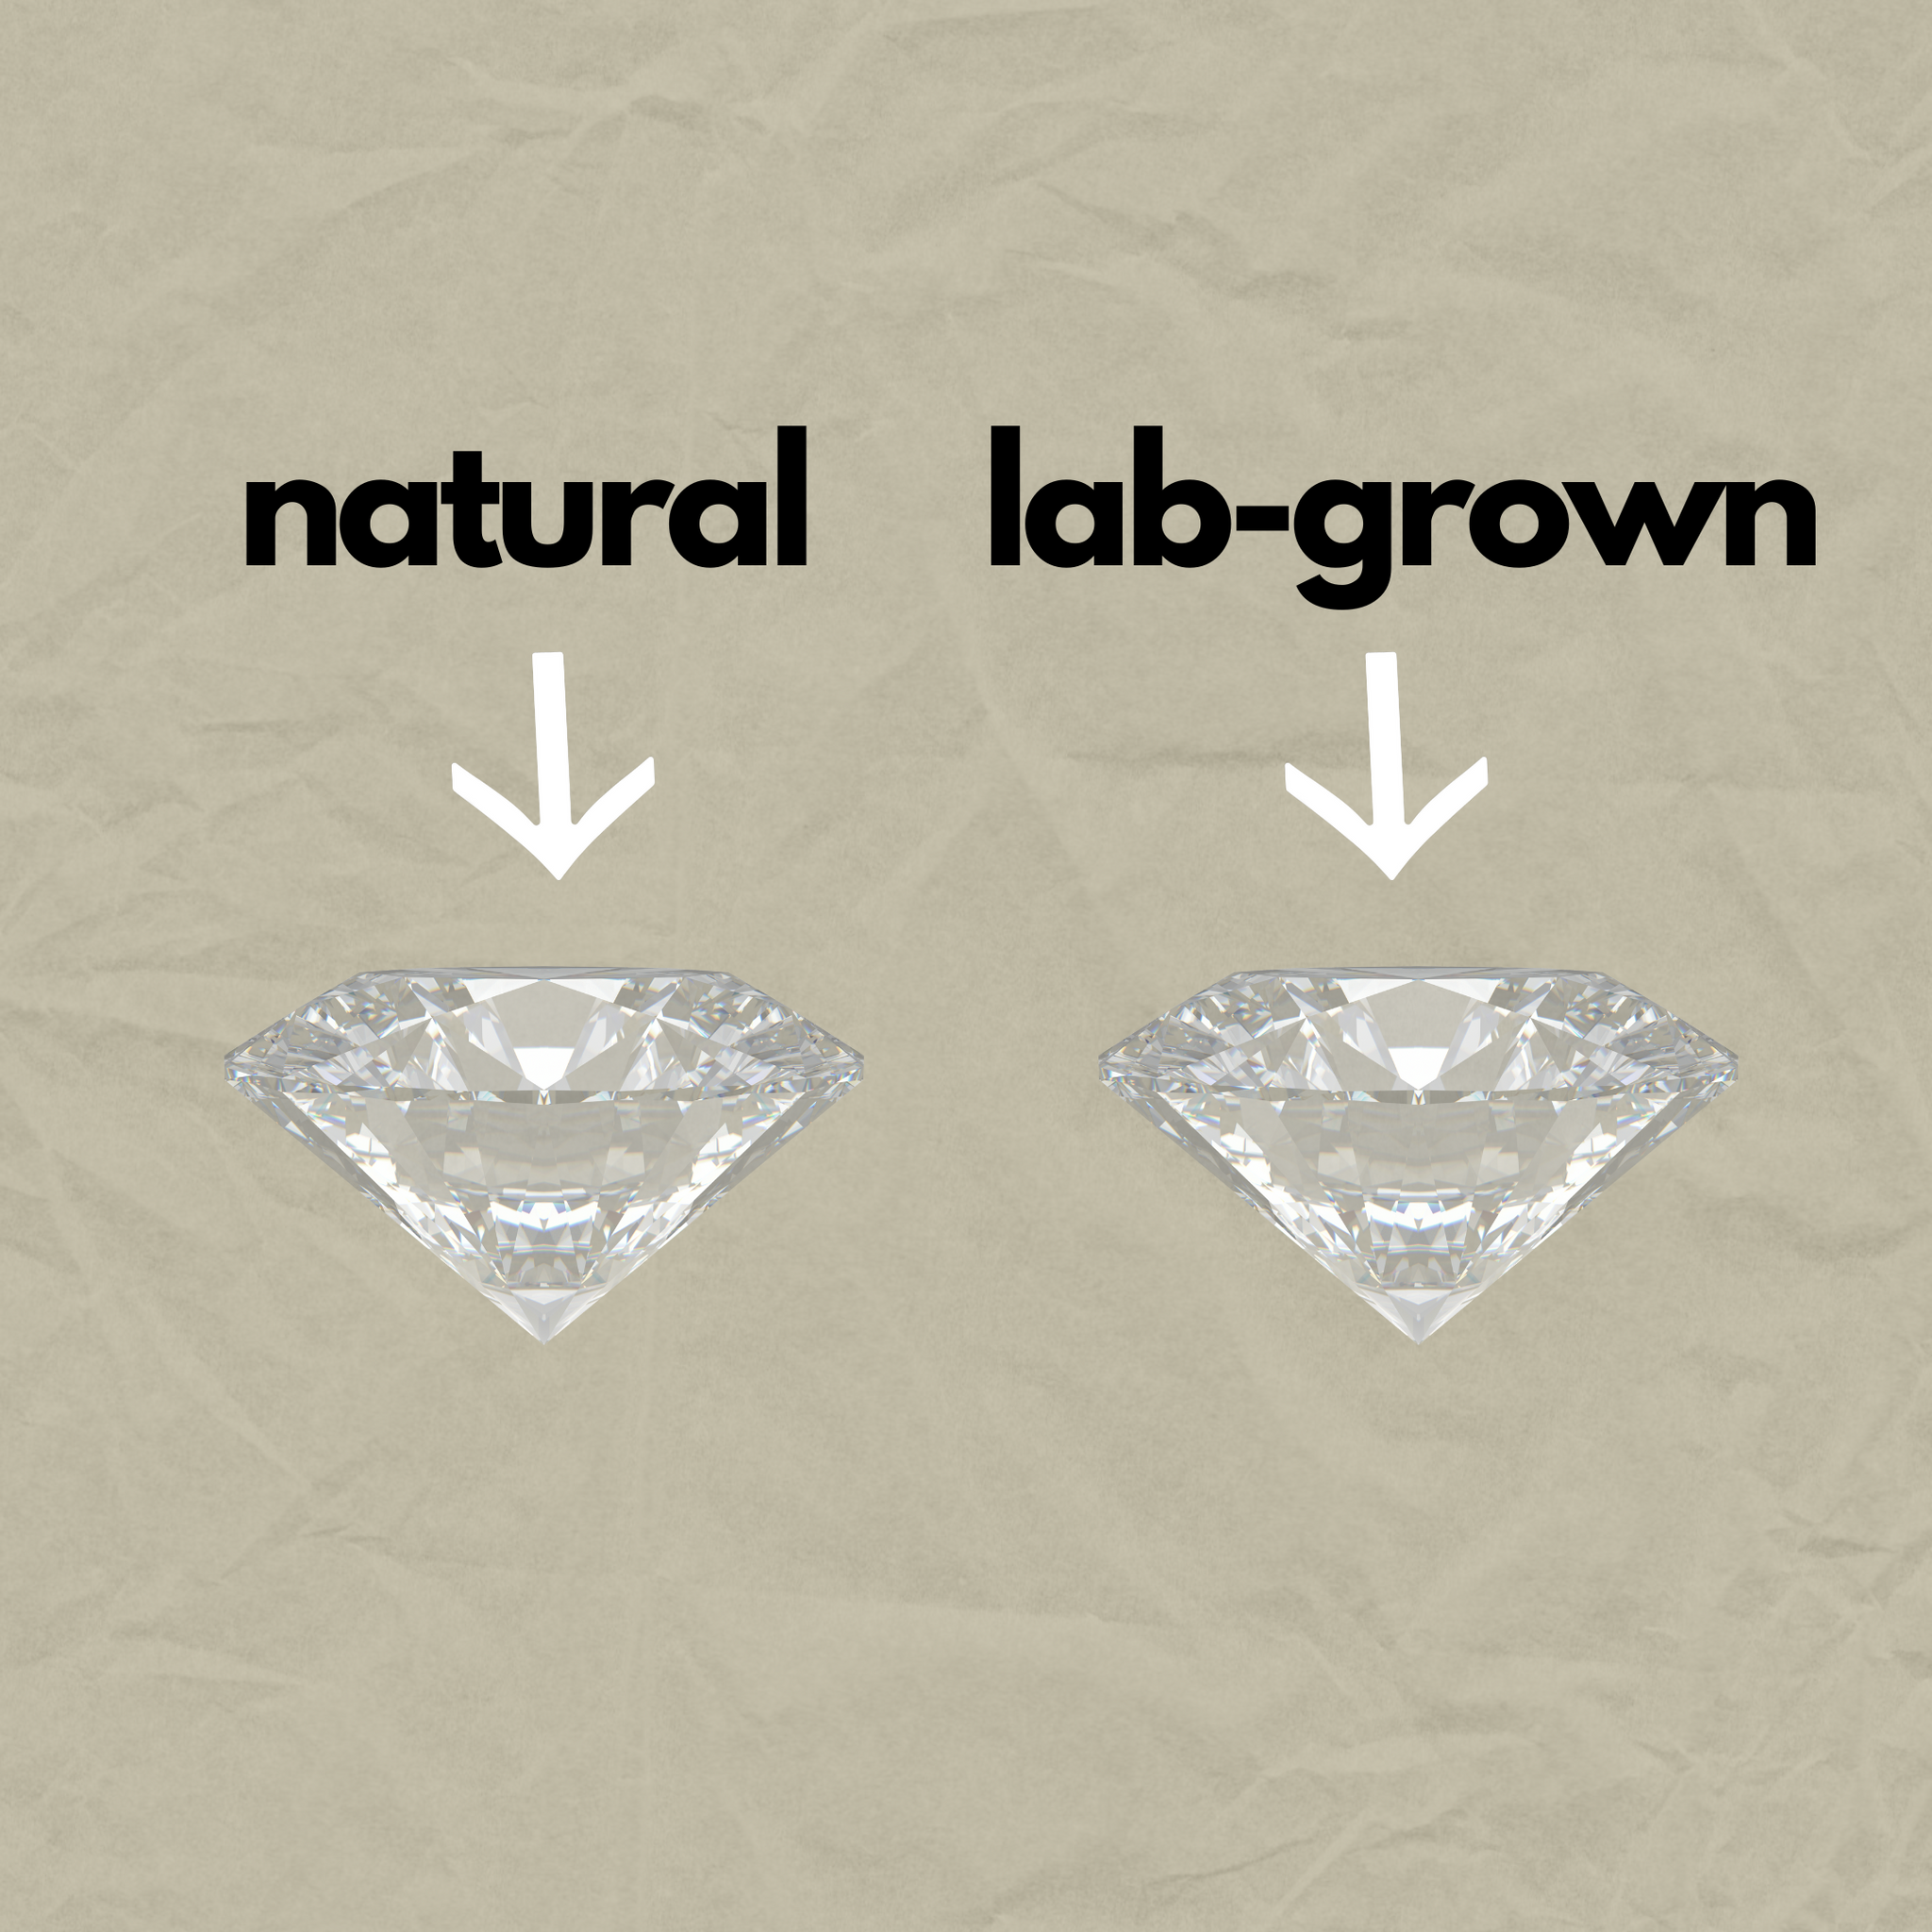 visual comparison of natural and lab grown diamonds